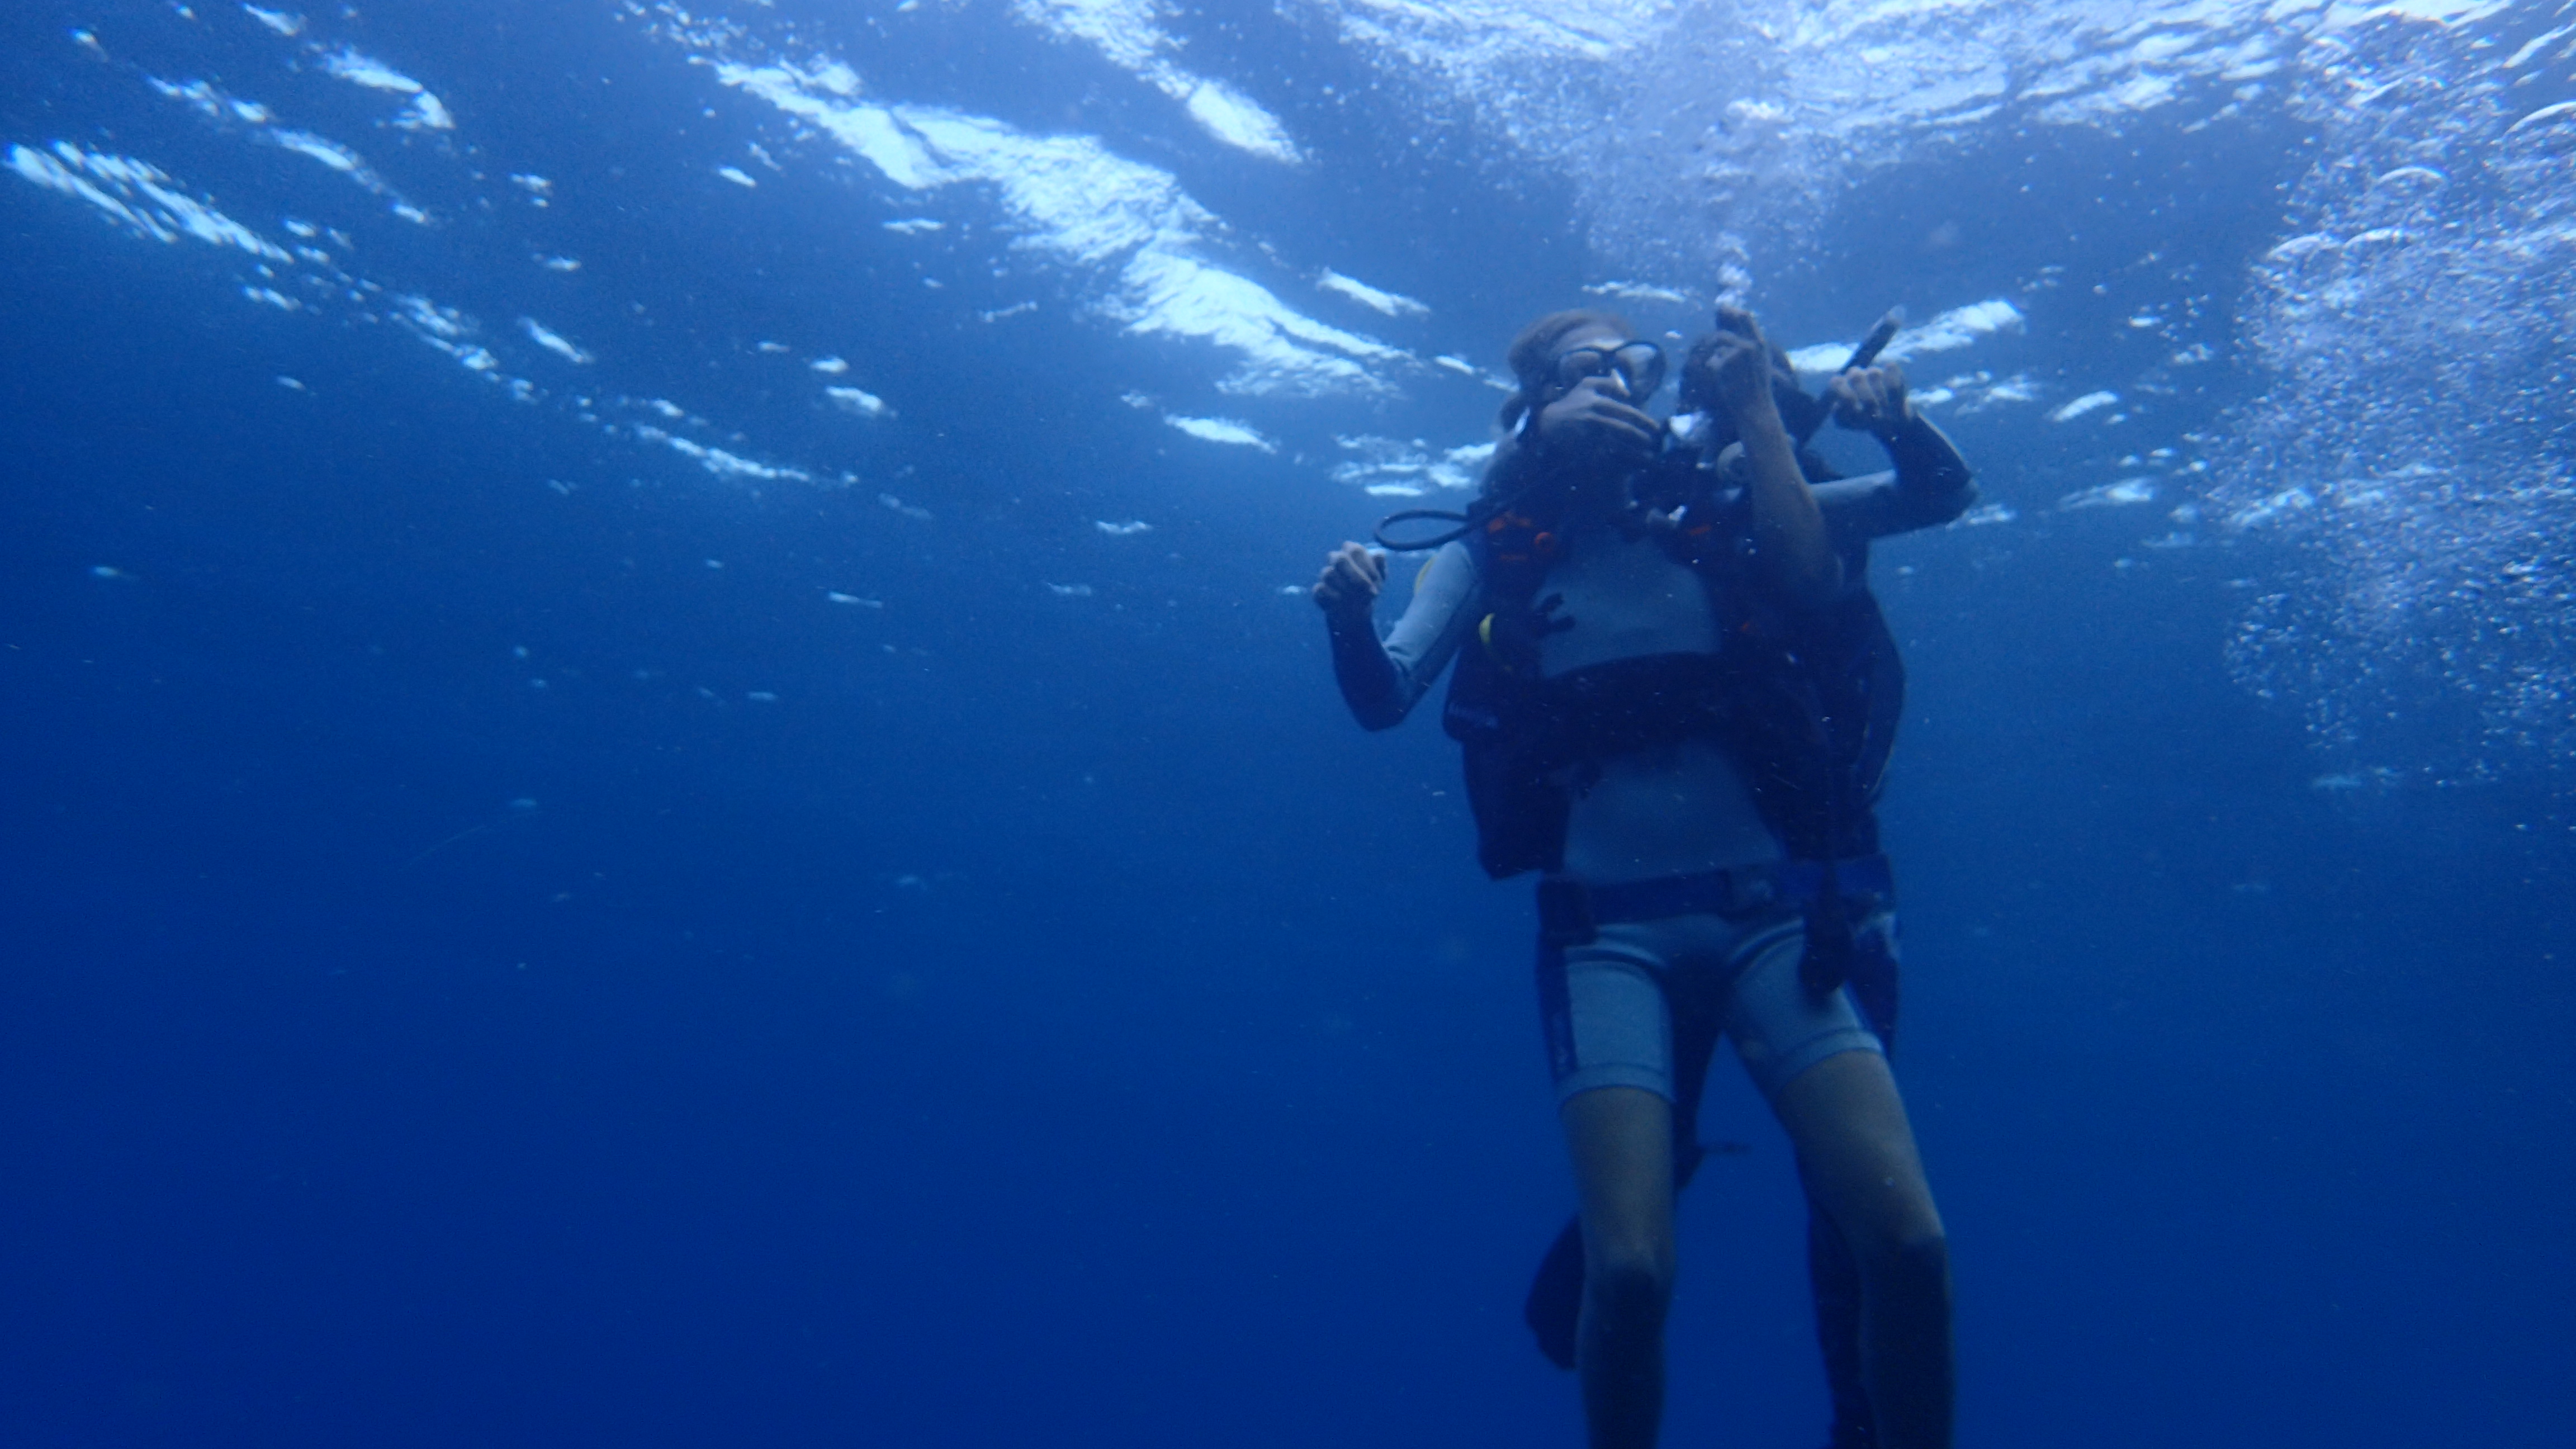 Lifting an unresponsive diver to the surface